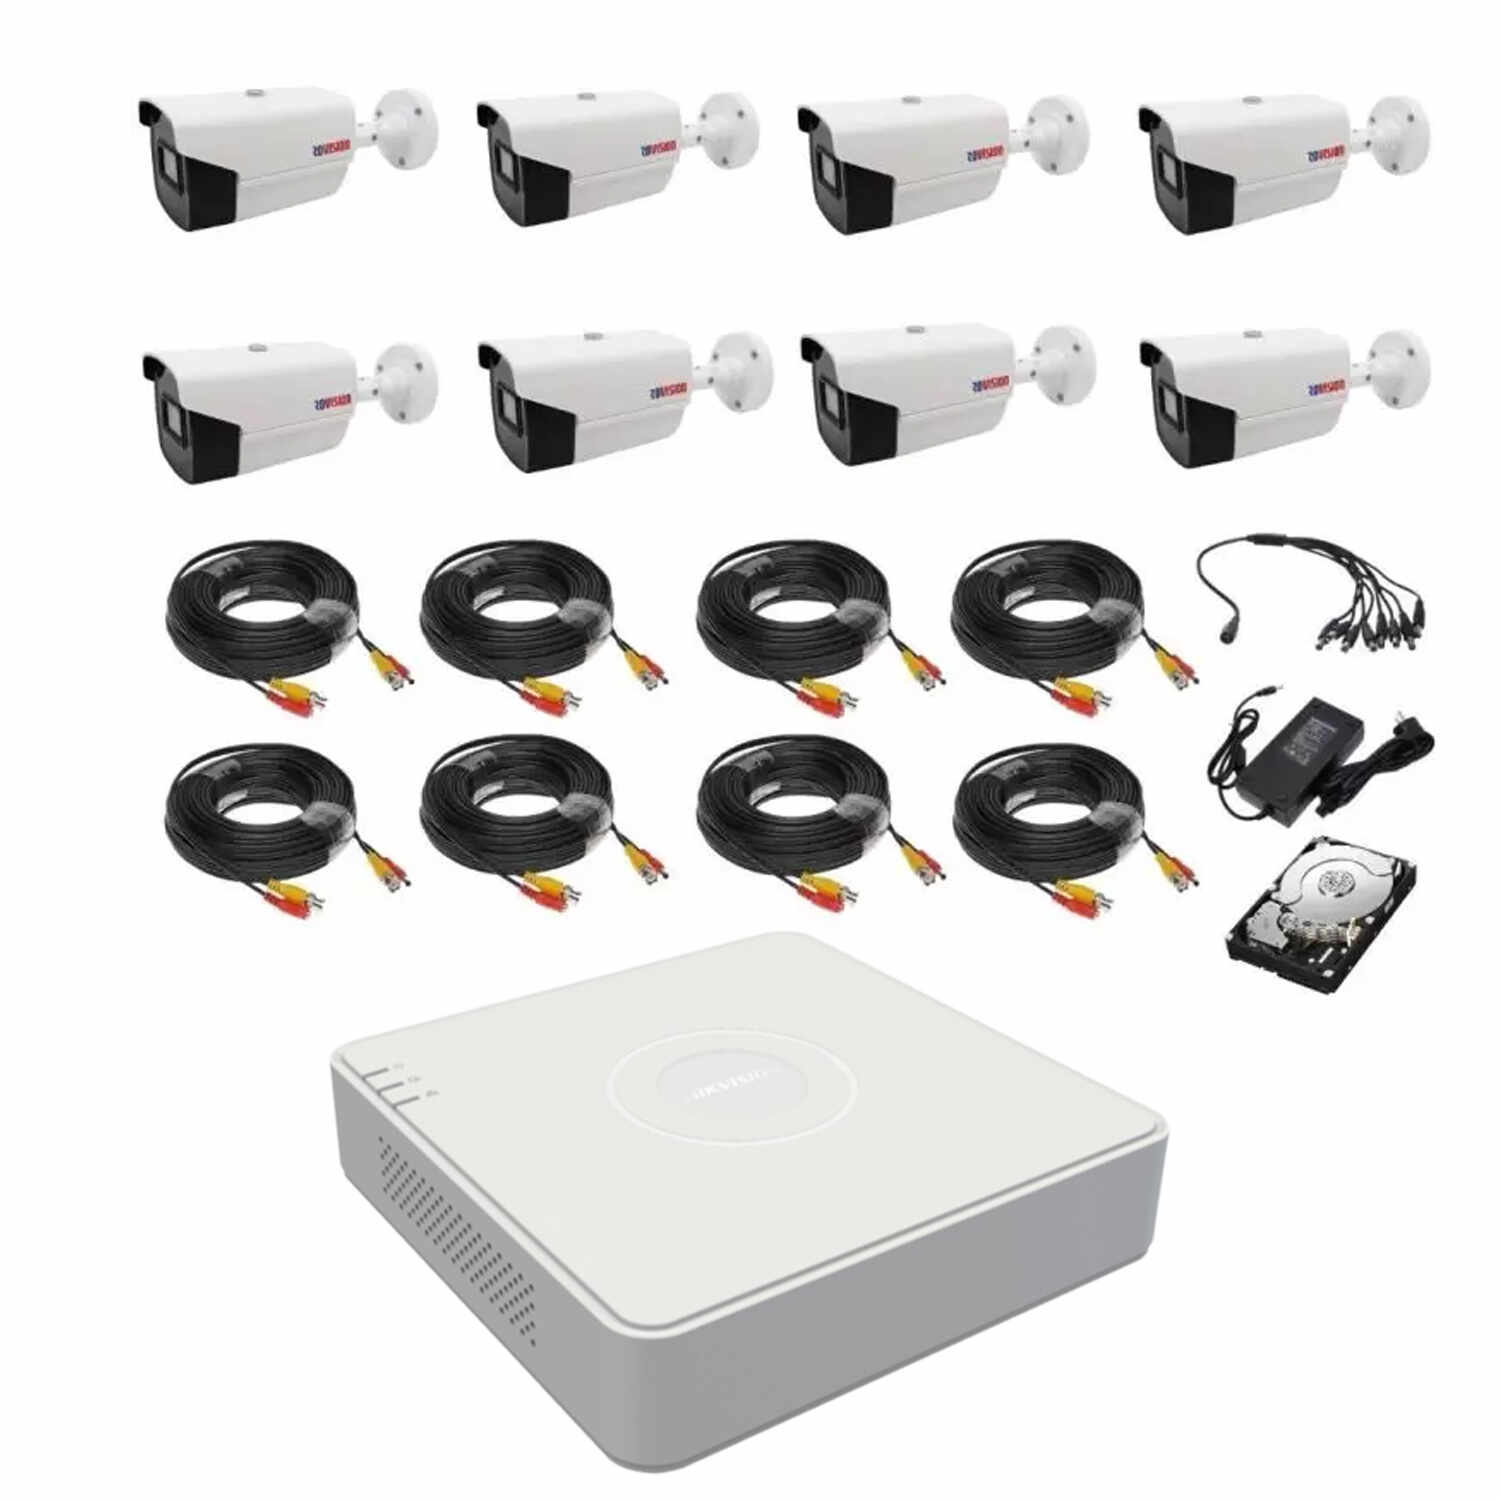 Sistem supraveghere 8 camere Rovision oem Hikvision 2MP full hd, IR40m, DVR 8 Canale, Accesorii si hard incluse